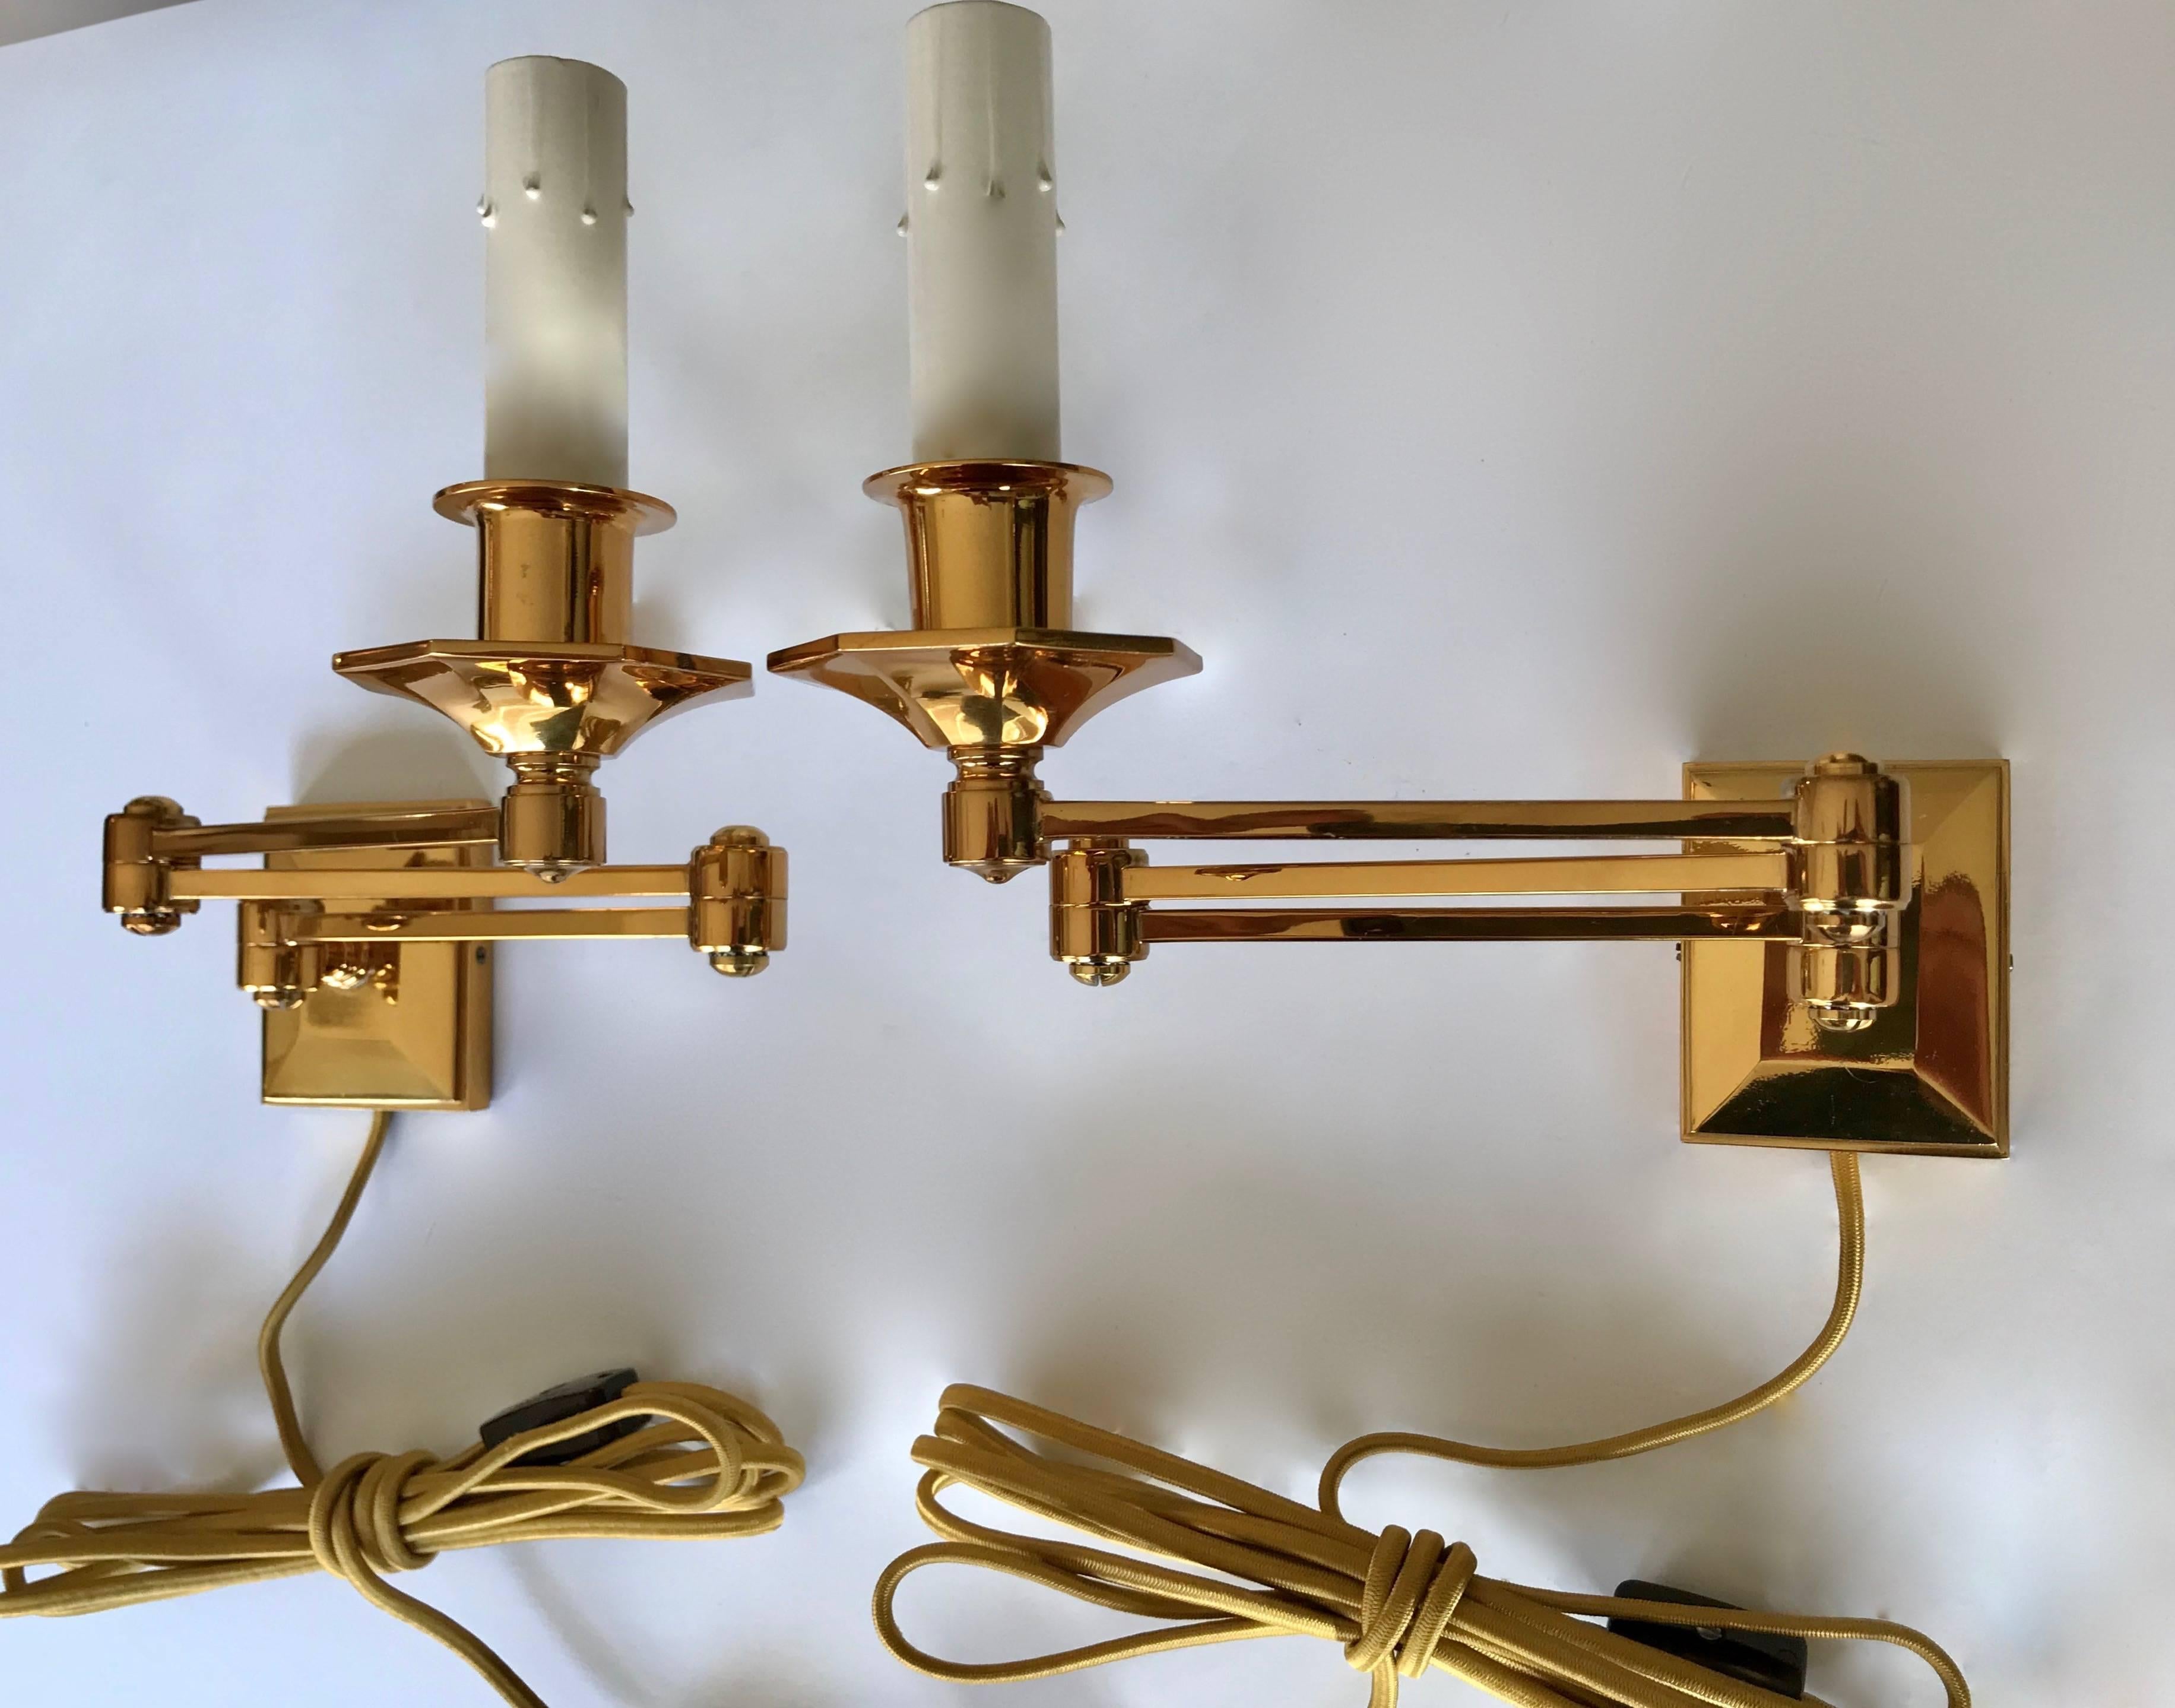 A pair of English style brass swing arm wall sconces, wall-mounted with rayon covered cords. Beautiful quality in a smaller scale. Perfect for adding to either side of a headboard without having to add junction boxes.

Measures: 7